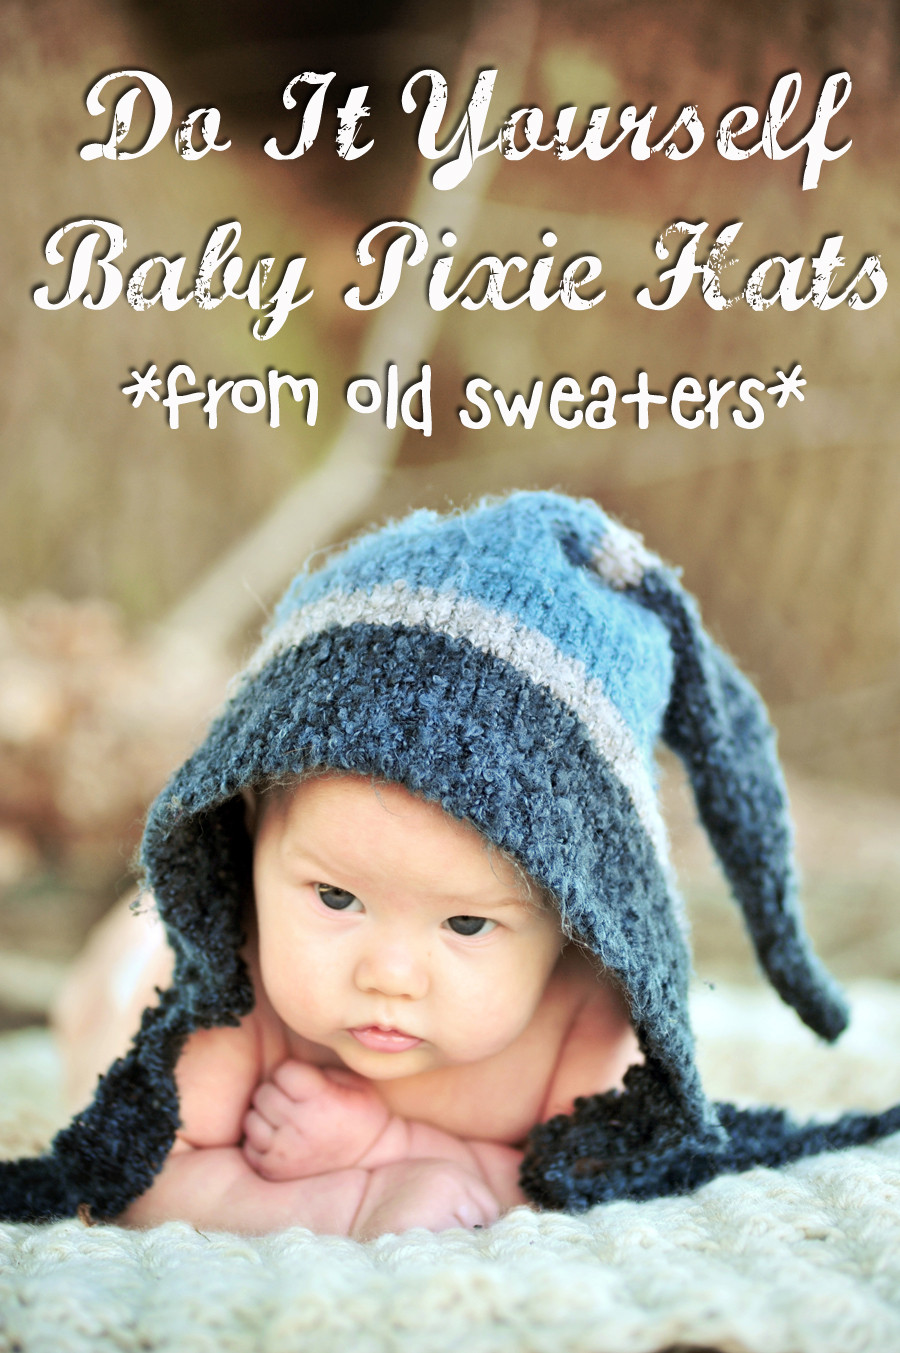 DIY Baby Hats
 DIY Baby Pixie Hats from Old Sweaters